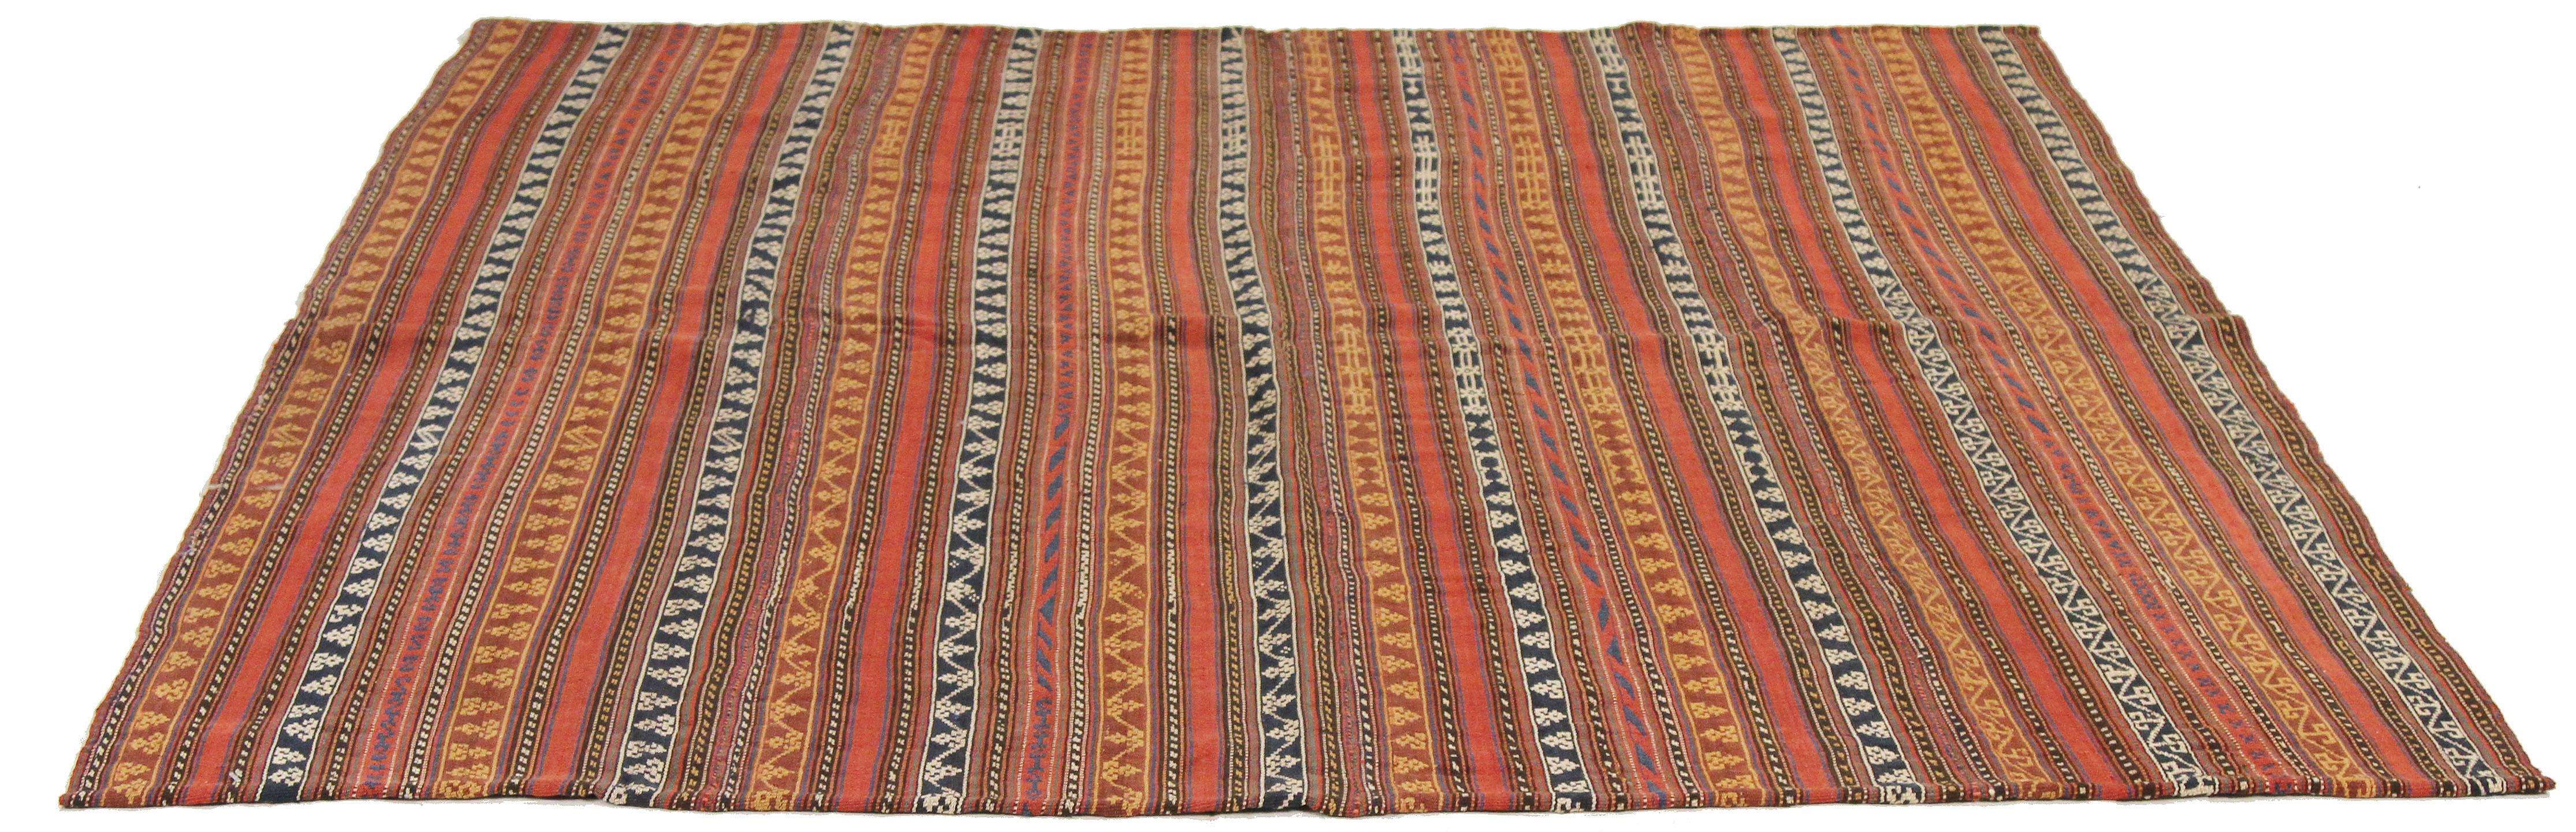 Antique Persian rug handwoven from the finest sheep’s wool and colored with all-natural vegetable dyes that are safe for humans and pets. It’s a traditional Jajim flat-weave design featuring stripes in various colors. It’s a stunning piece to get